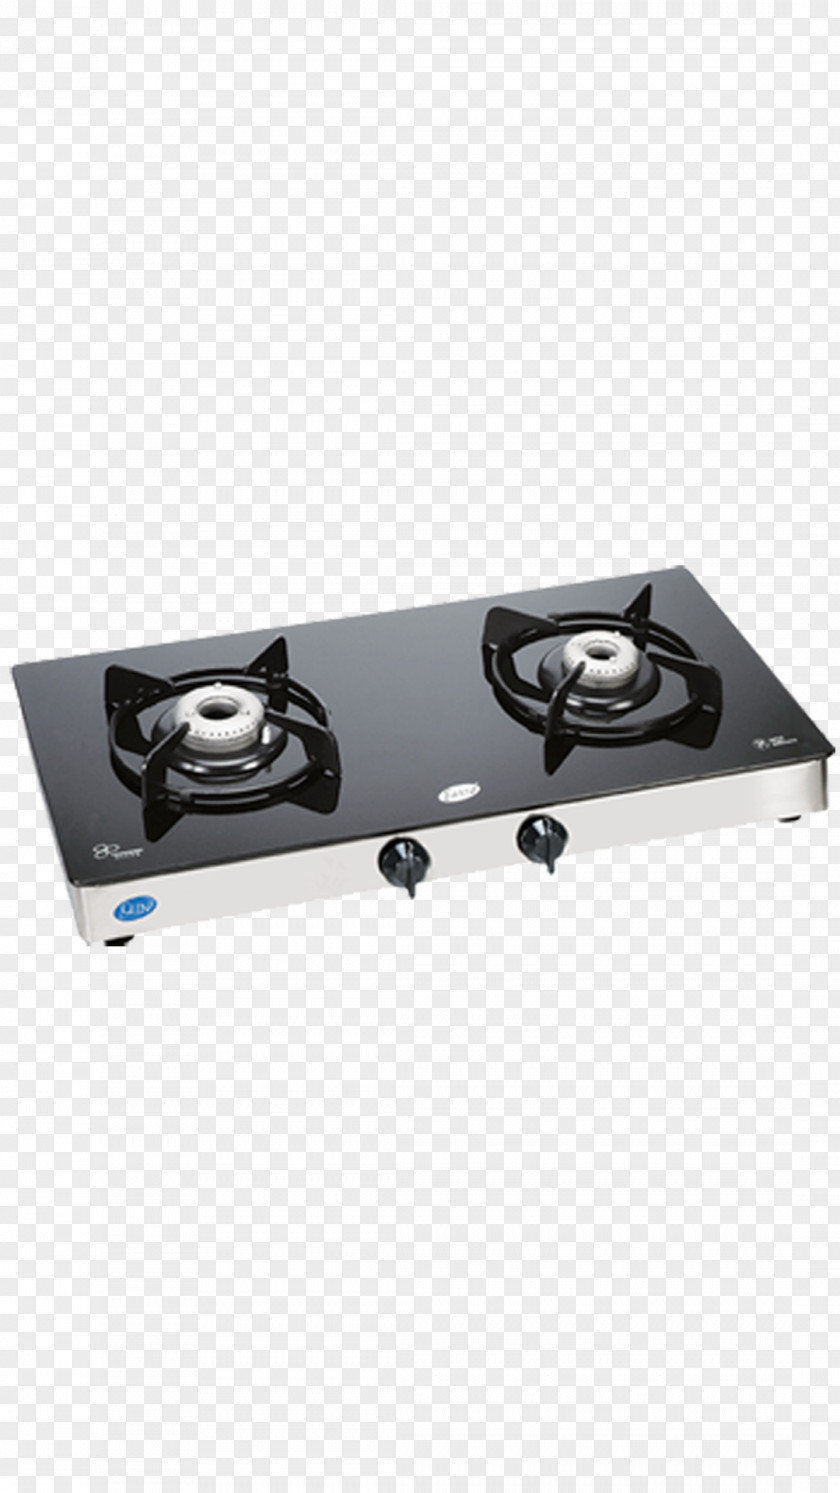 Chimney Gas Stove Cooking Ranges Brenner Hob Home Appliance PNG